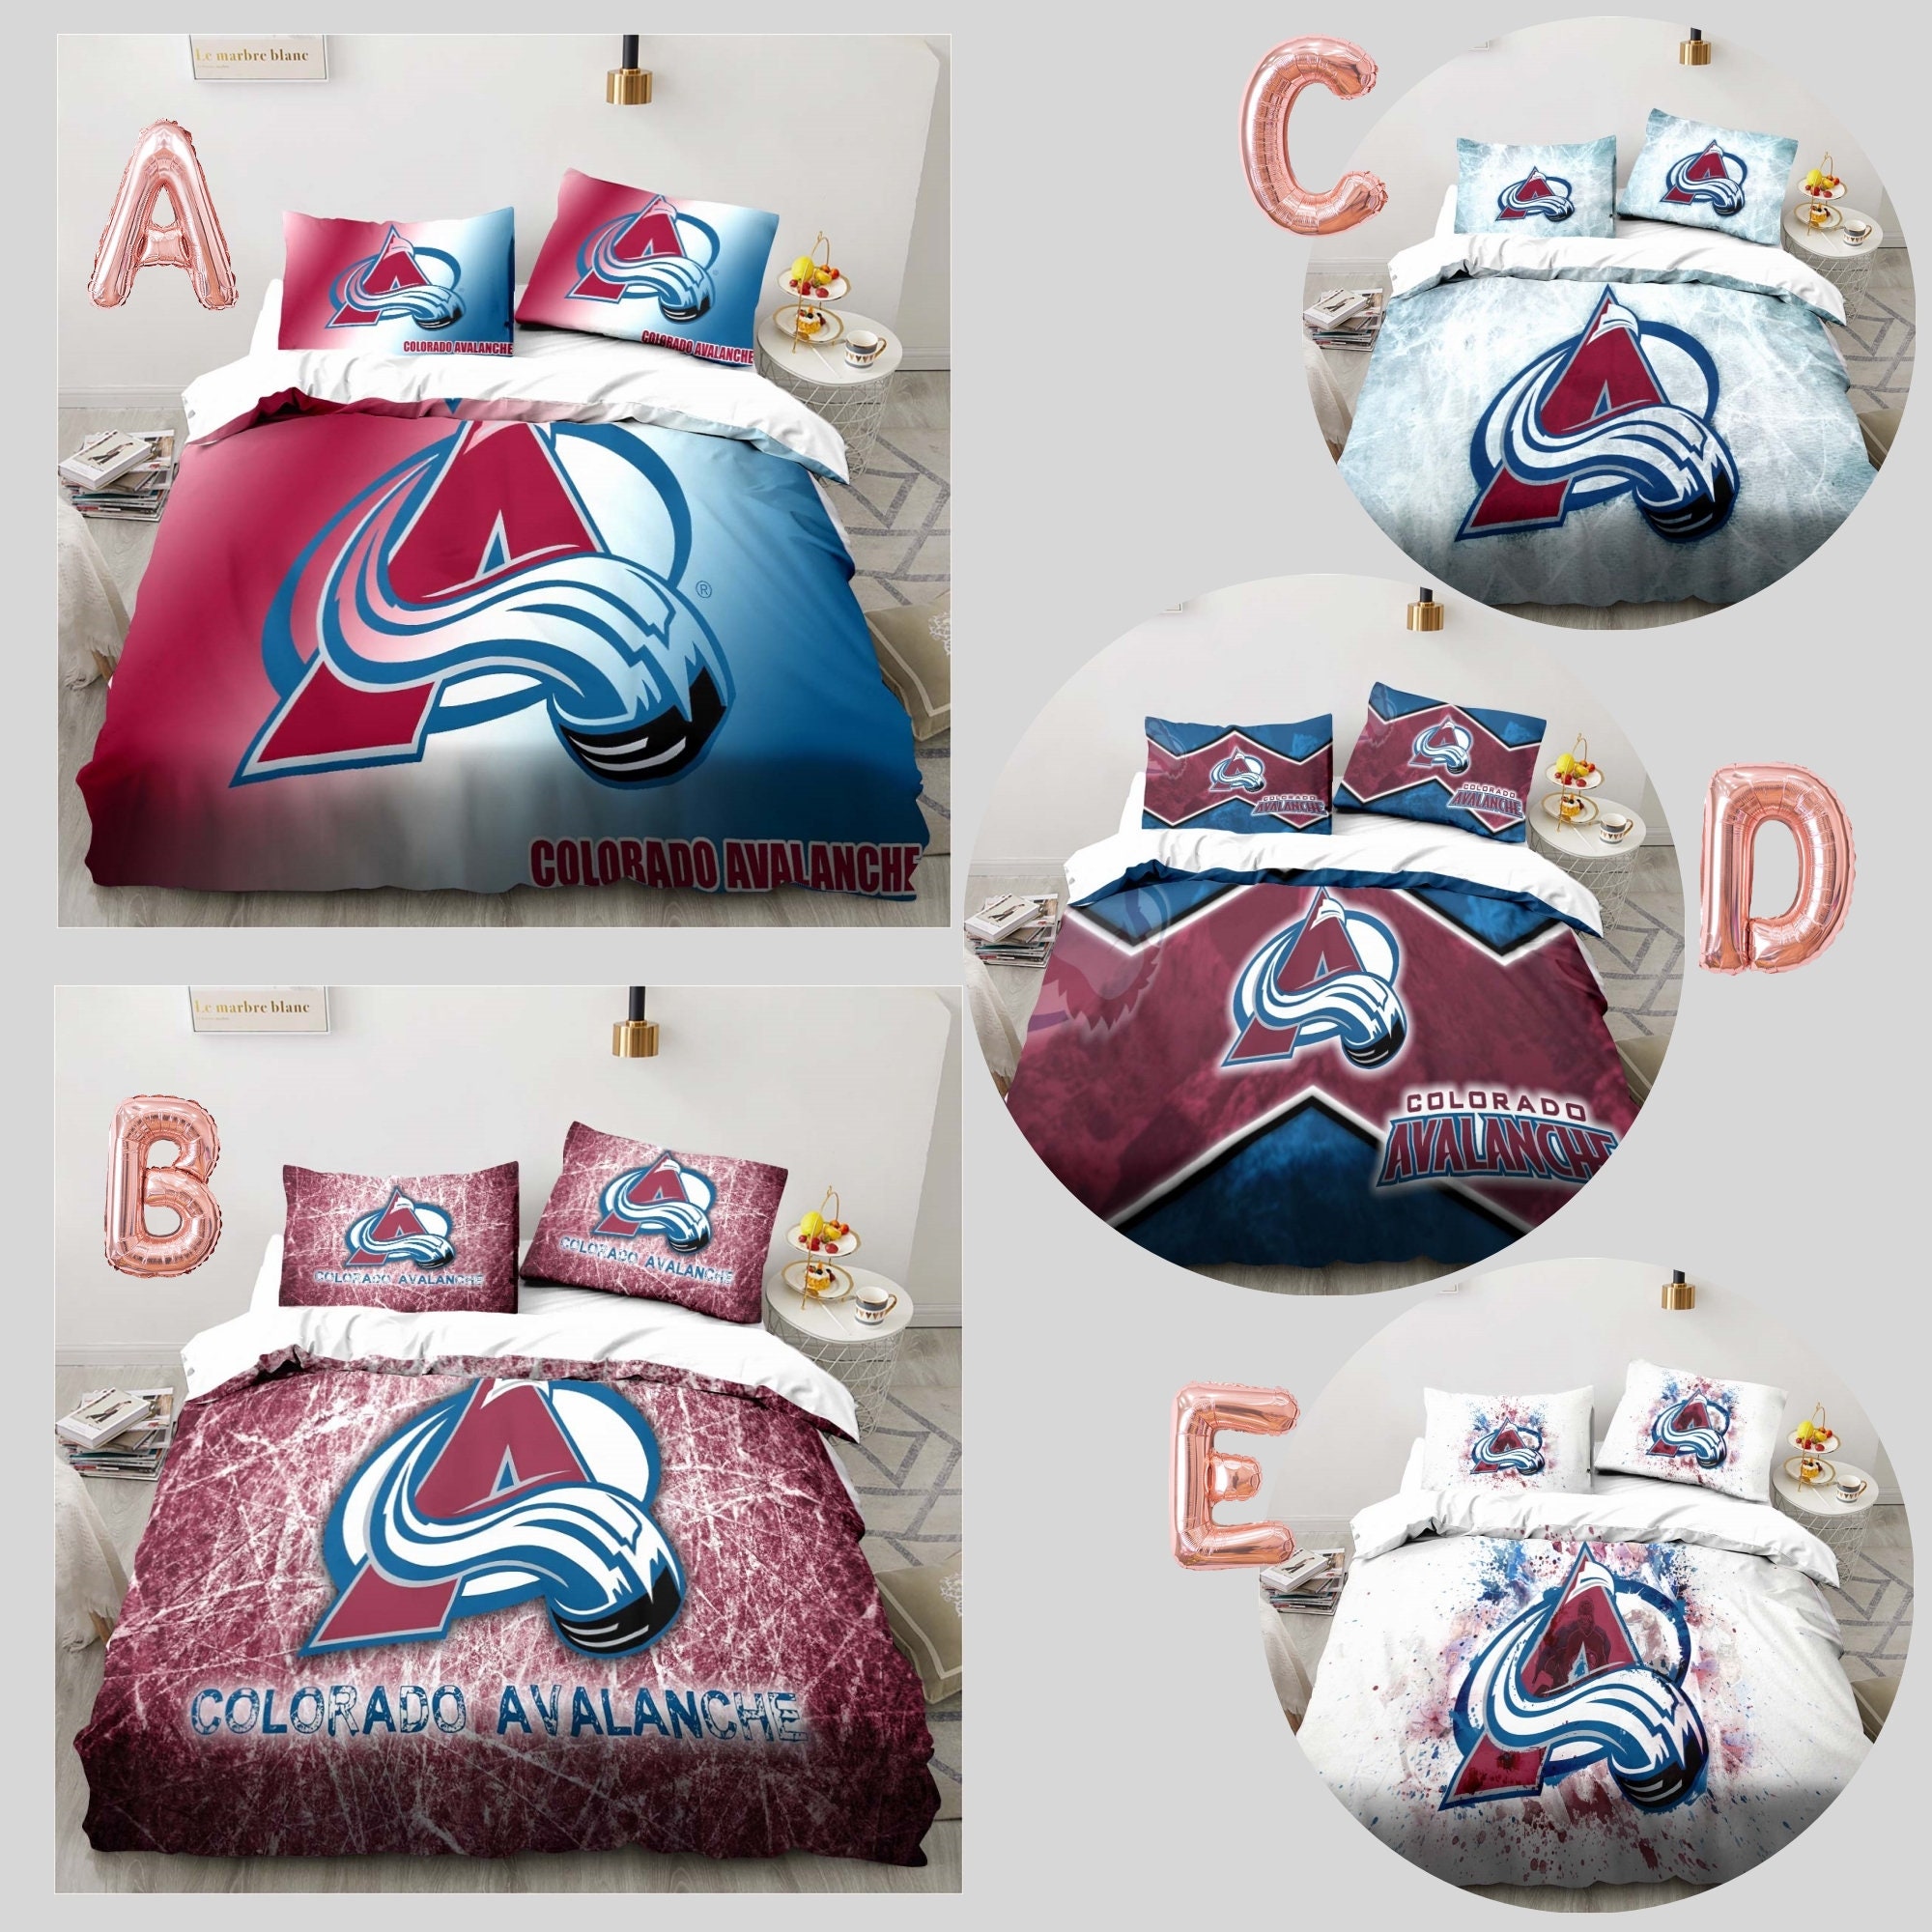 Avalanche newborn/baby clothes Avalanche baby gift Colorado hockey baby  gift 